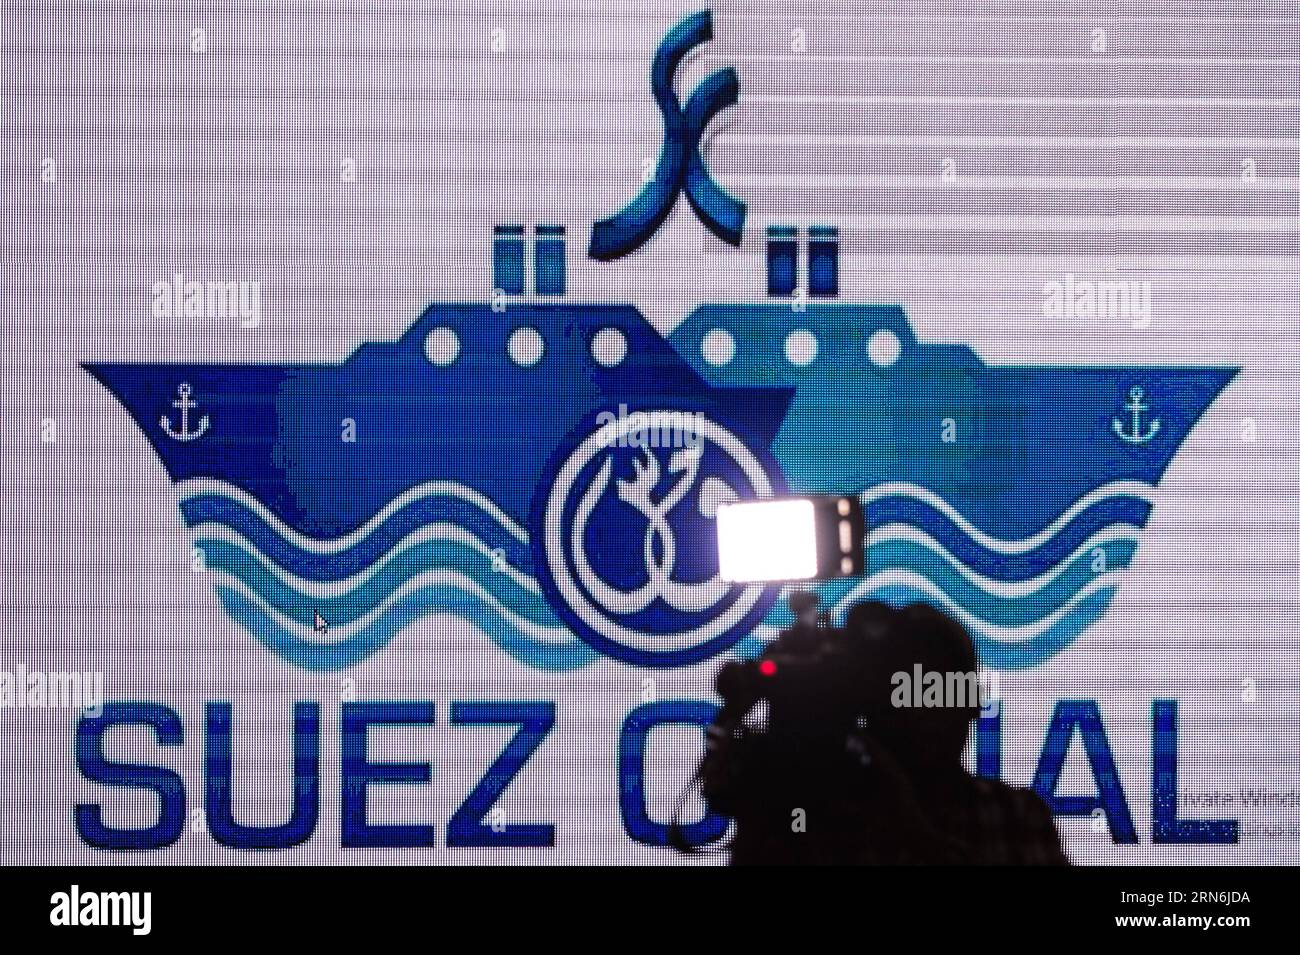 (150729) -- ISMAILIA, July 29, 2015 -- A cameraman takes video clips on a press conference about the new Suez Canal in Ismailia, a port city in Egypt, on July 29, 2015. The dredging work of Egypt s New Suez Canal has been completed and the waterway is ready as well as safe for huge ship navigation, Mohab Memish, head of the Suez Canal Authority (SCA), told reporters in a press conference Wednesday. ) EGYPT-ISMAILIA-NEW SUEZ CANAL PanxChaoyue PUBLICATIONxNOTxINxCHN   150729 Ismailia July 29 2015 a cameraman Takes Video Clips ON a Press Conference About The New Suez Canal in Ismailia a Port City Stock Photo